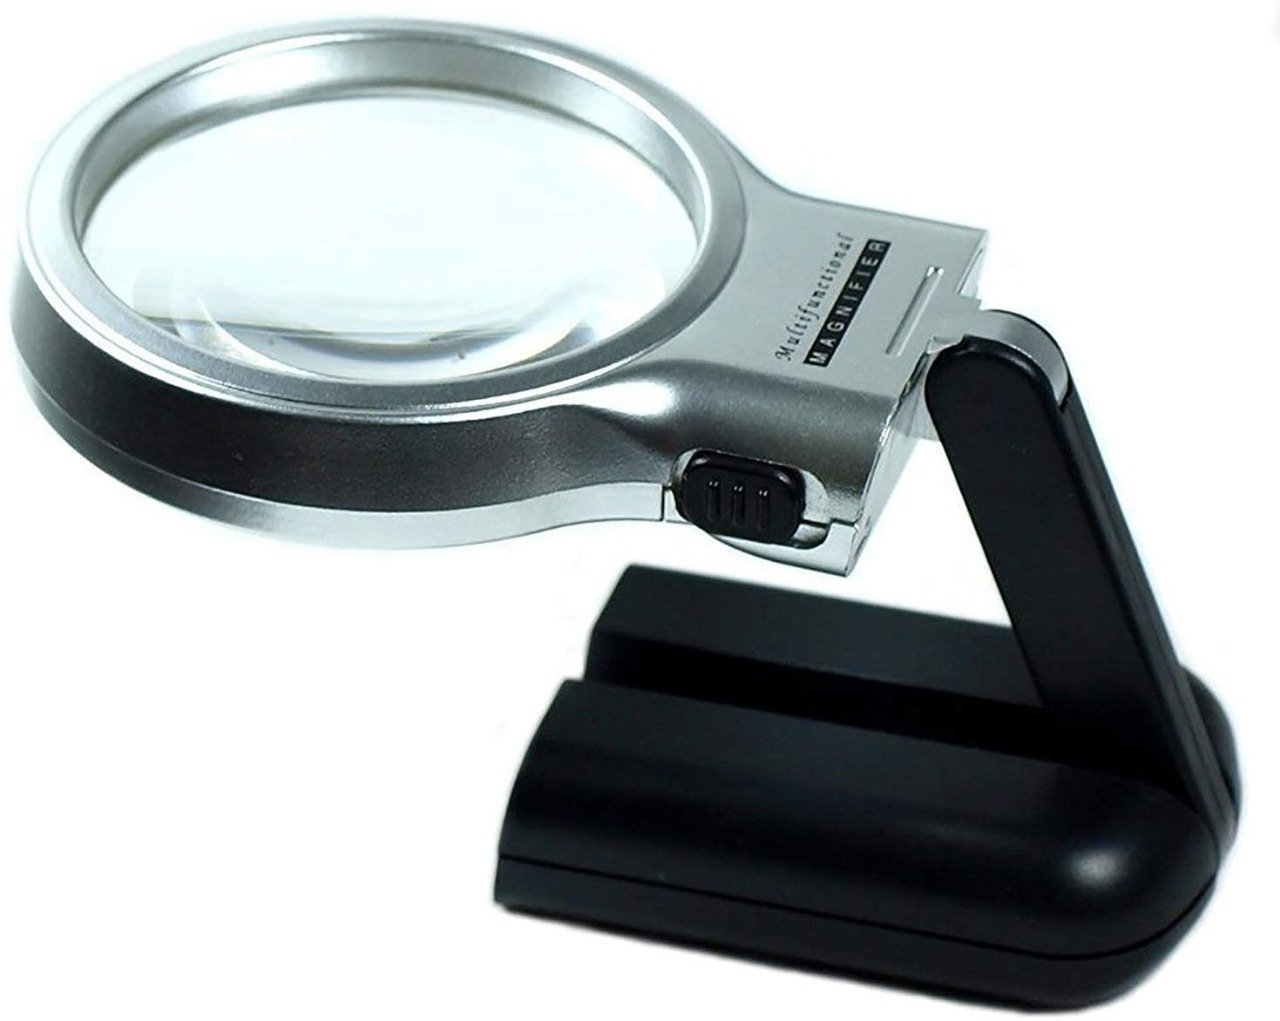 528 multifunctional 3 in 1 hand held folding lighted high powered magnifier glass with 3x zoom and 2 led lights